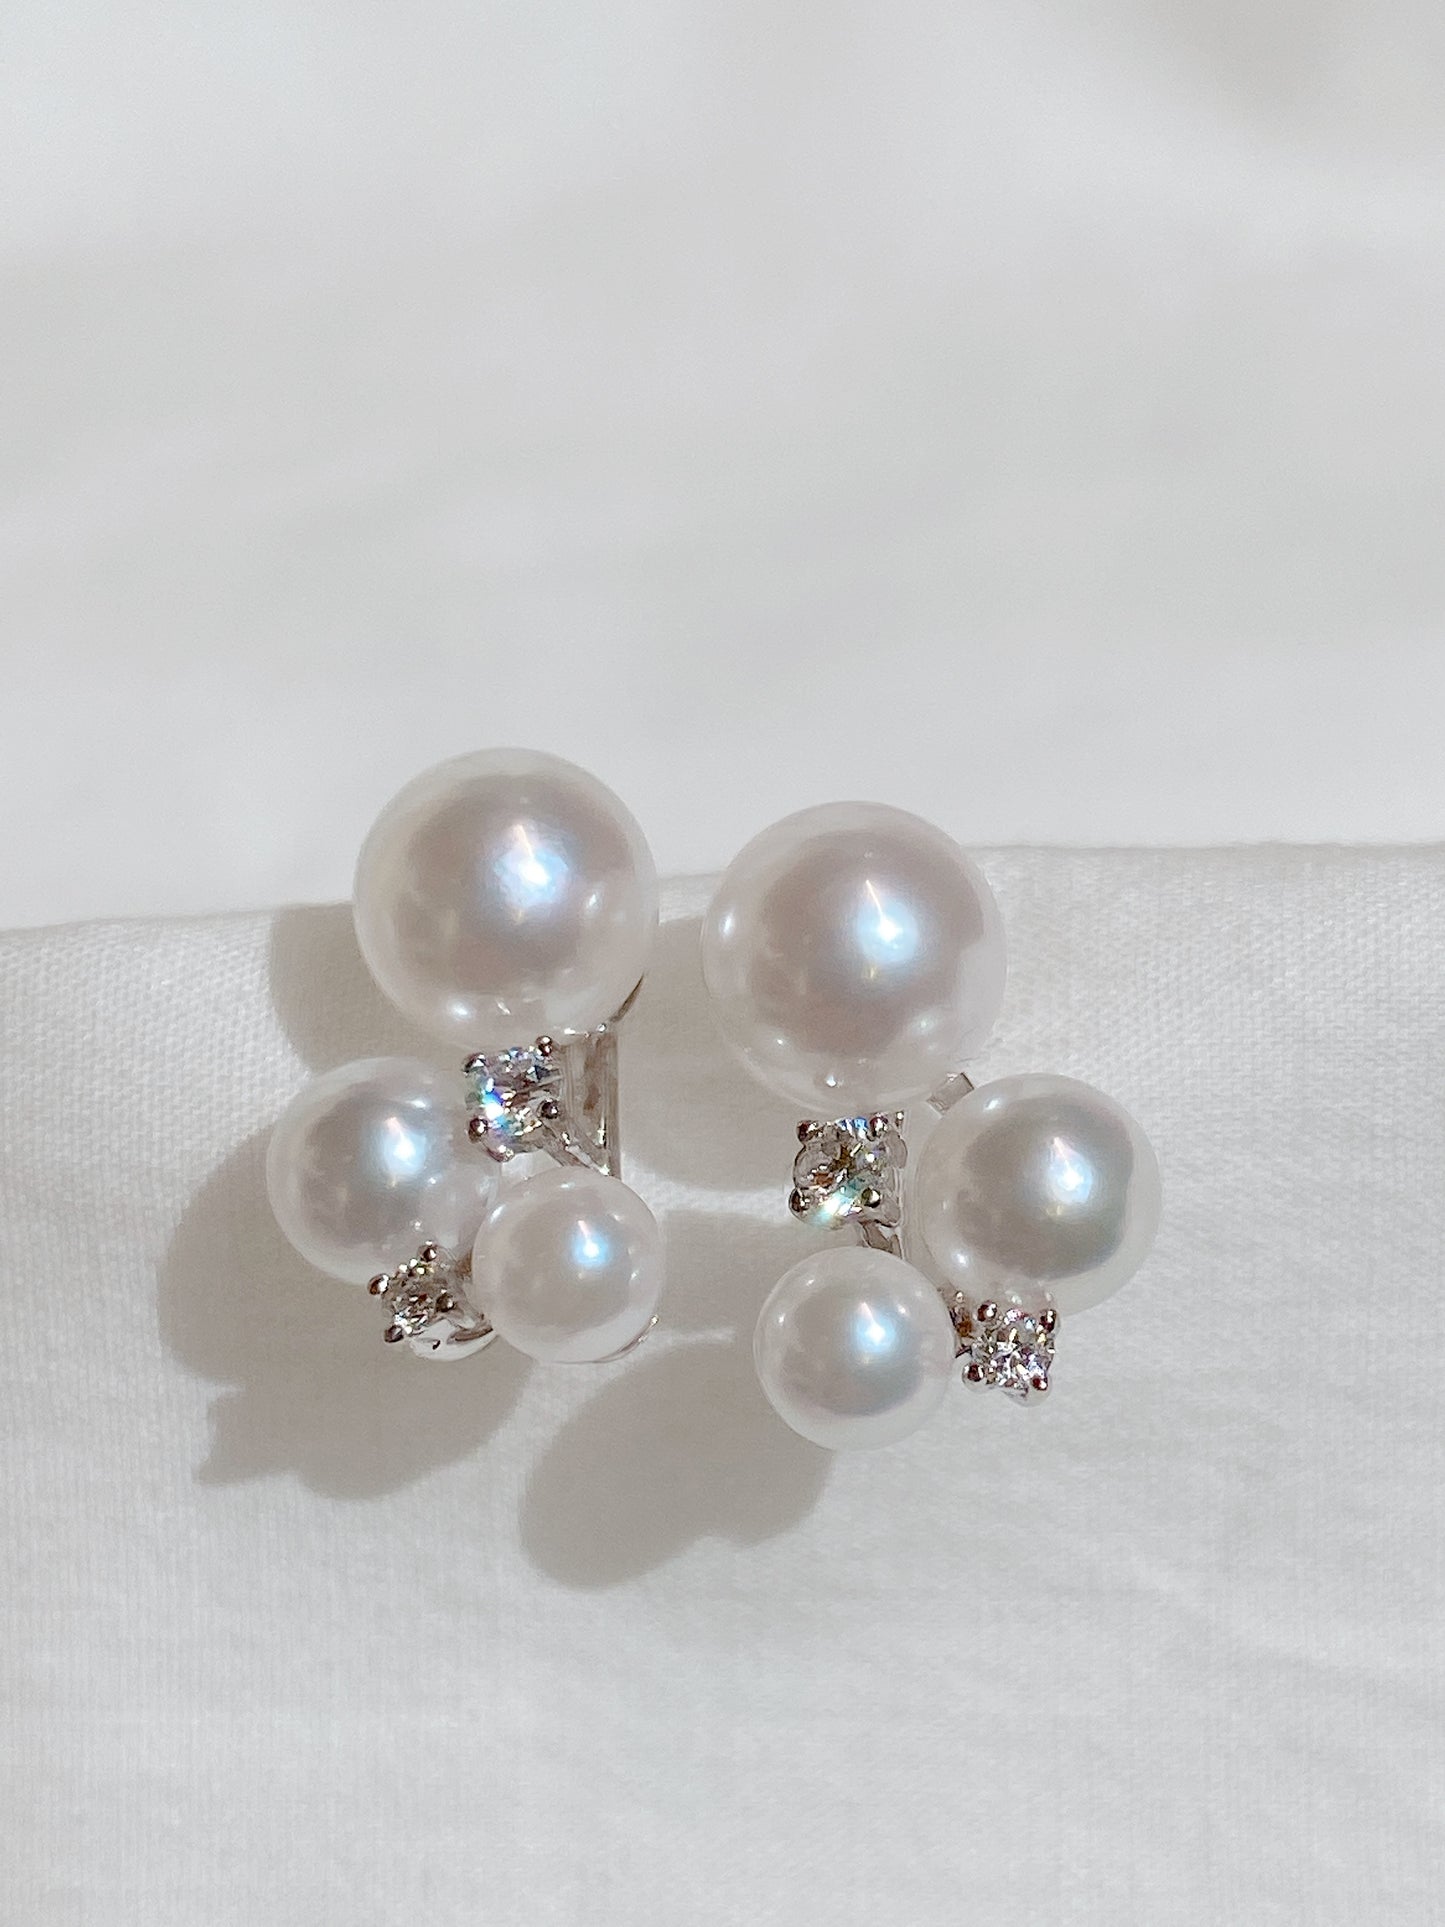 Akoya Pearl Earrings in 18K White Gold with Diamond, d0.15ct,4.5-7mm